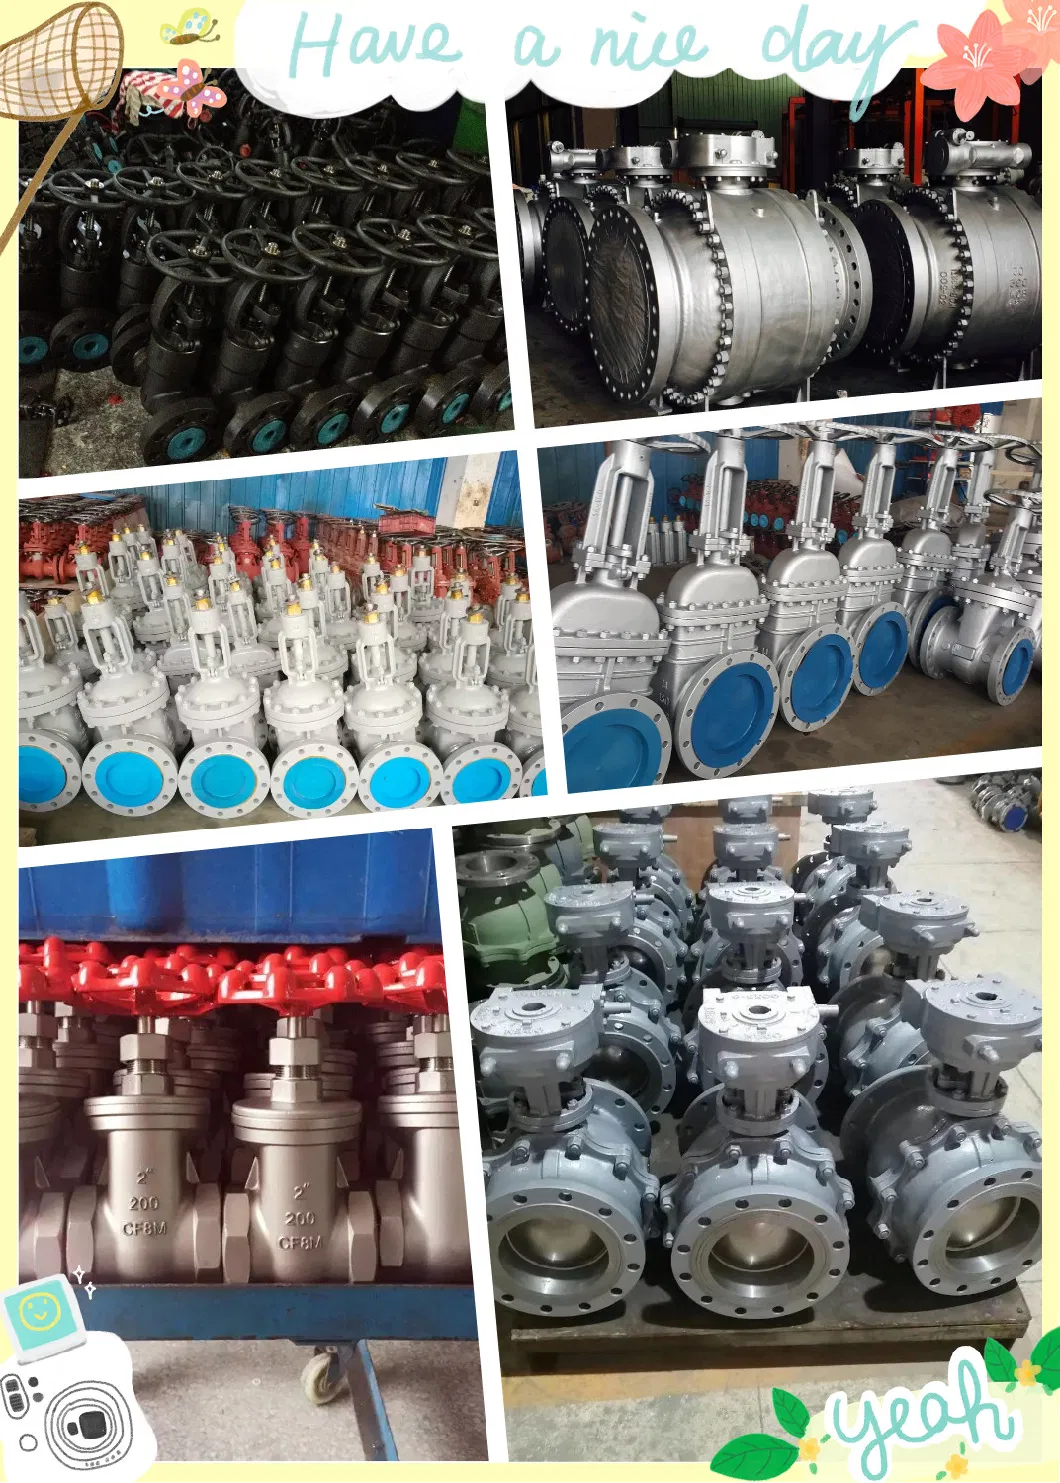 API 600 API 6D OEM/ODM Carbon/Stainless Steel Class 150 Flanged/Welded Bevel Gear Electric/Pneumatic/Hydraulic Industrial Oil Gas Water OS&Y Wedge Gate Valve